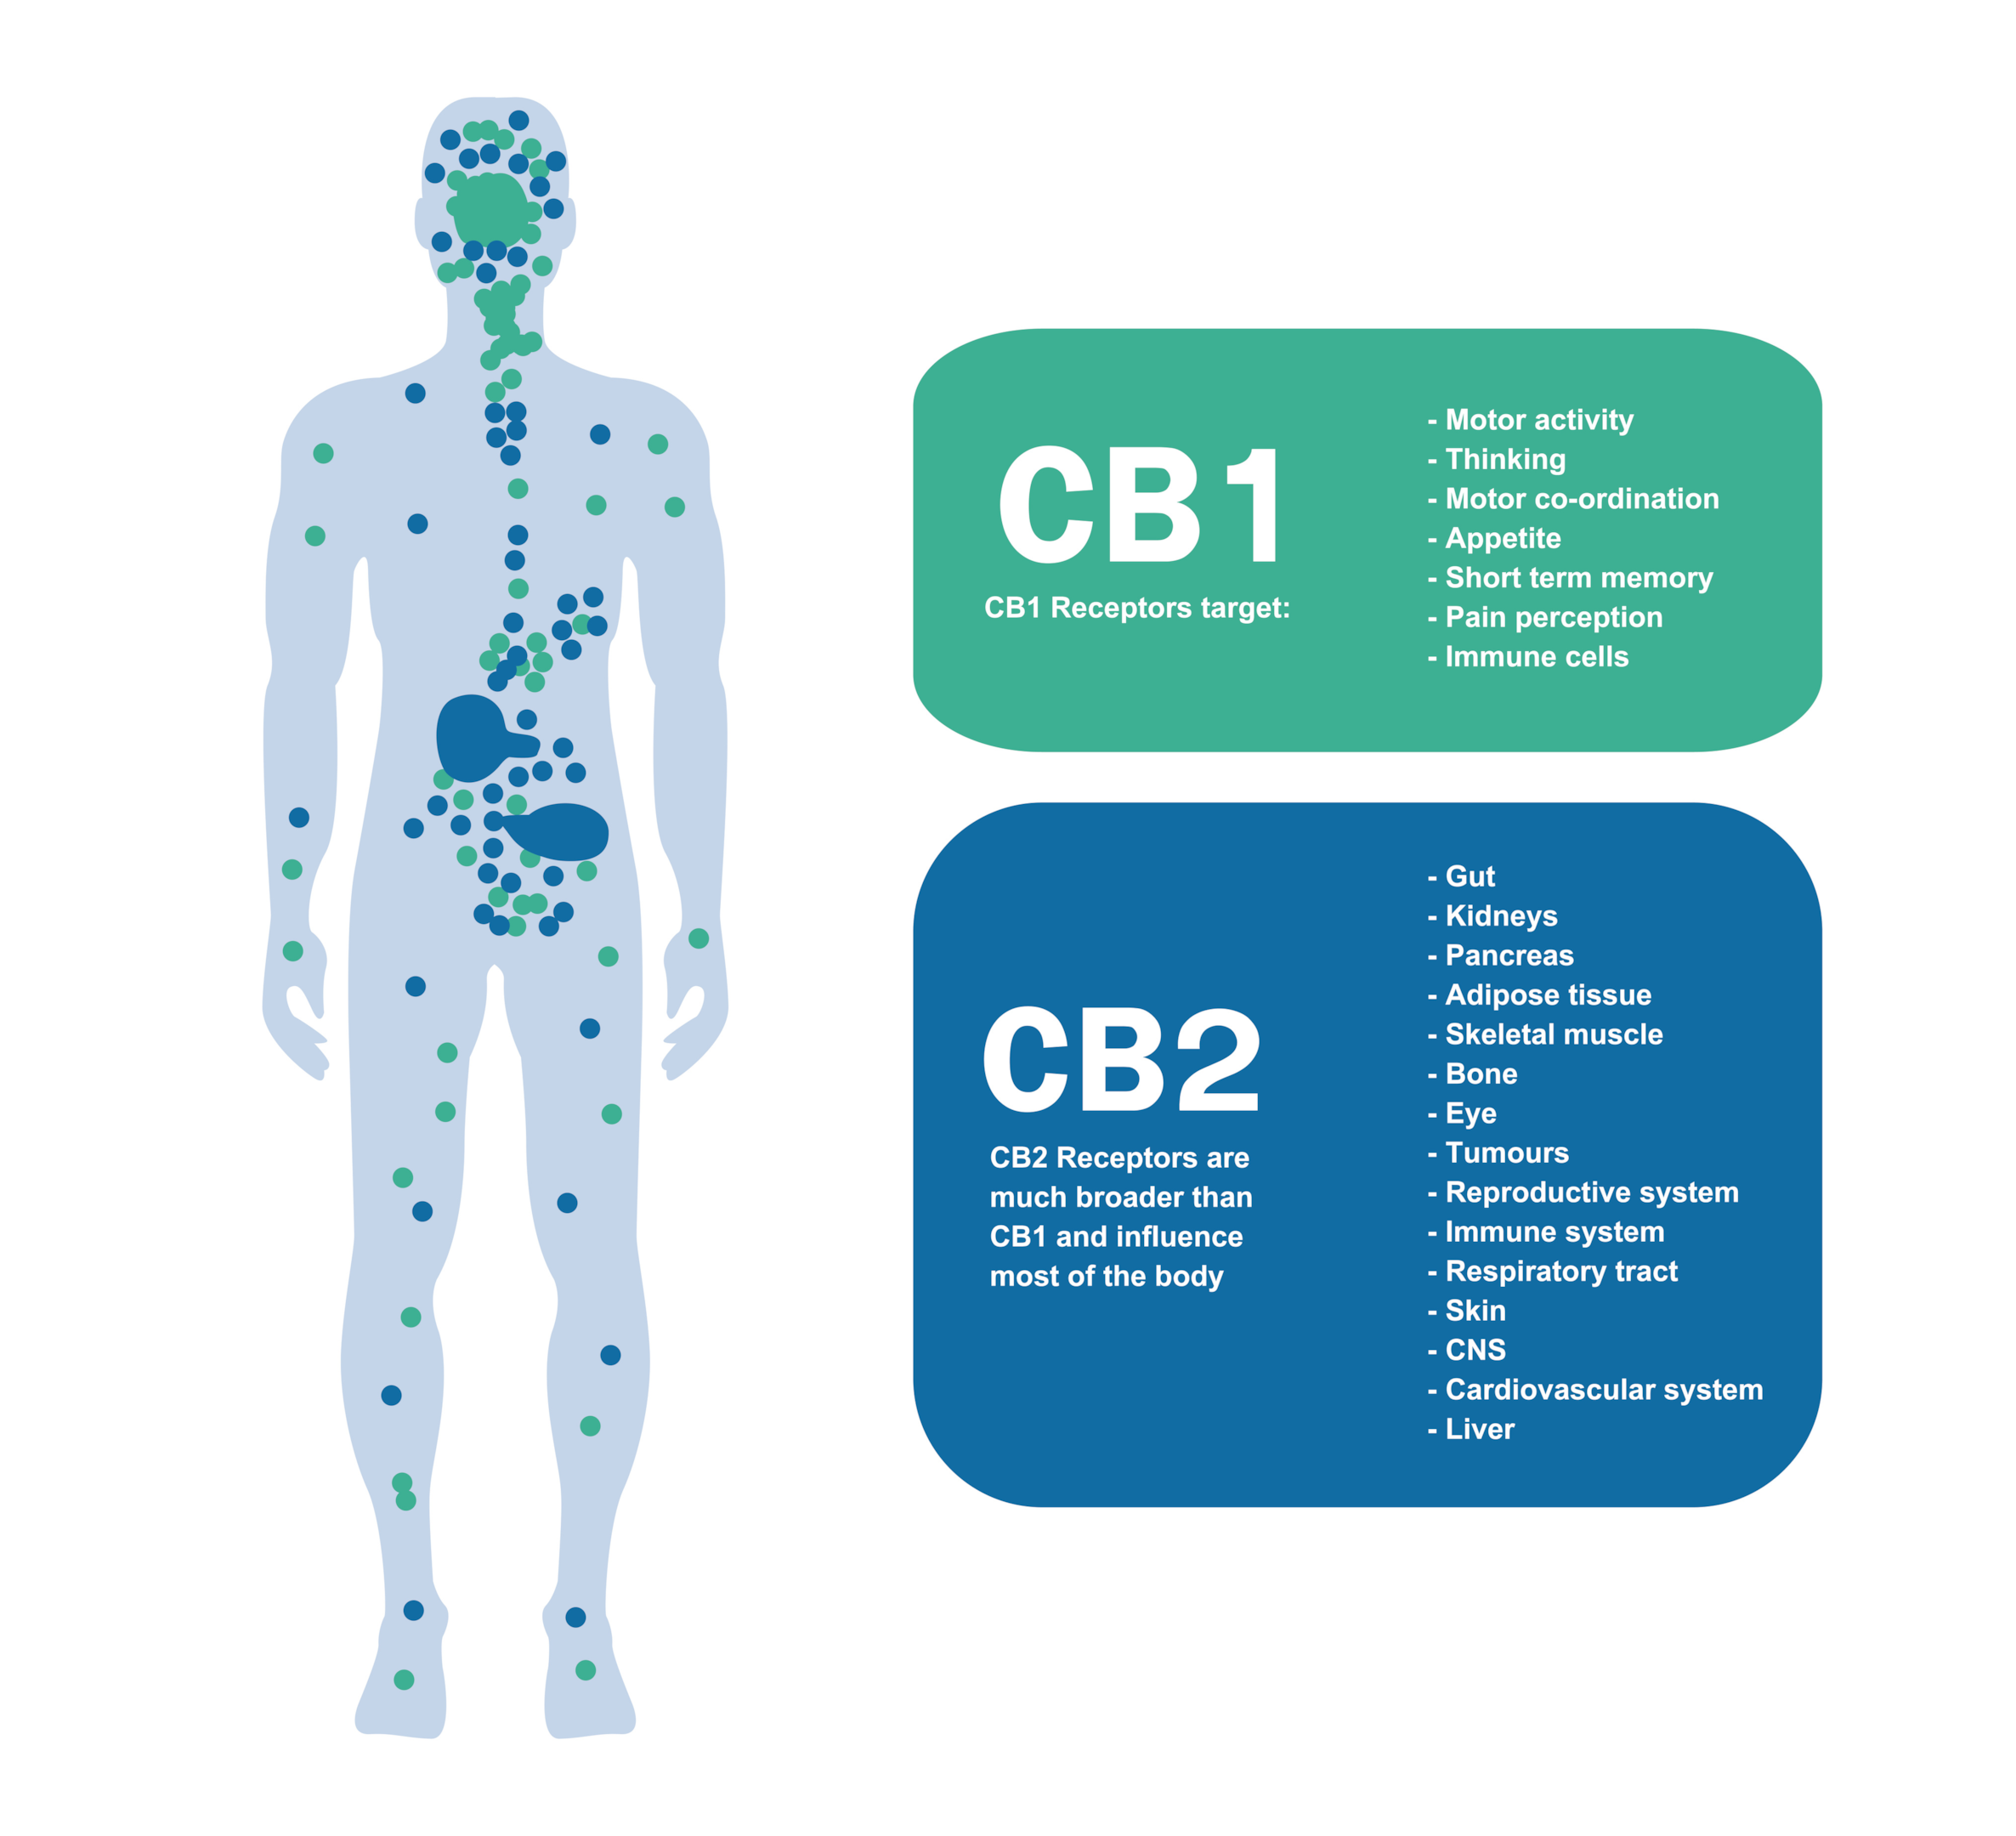 The ECS is a complex system that every living organism has, and cannabis products may have positive interactions with this system.